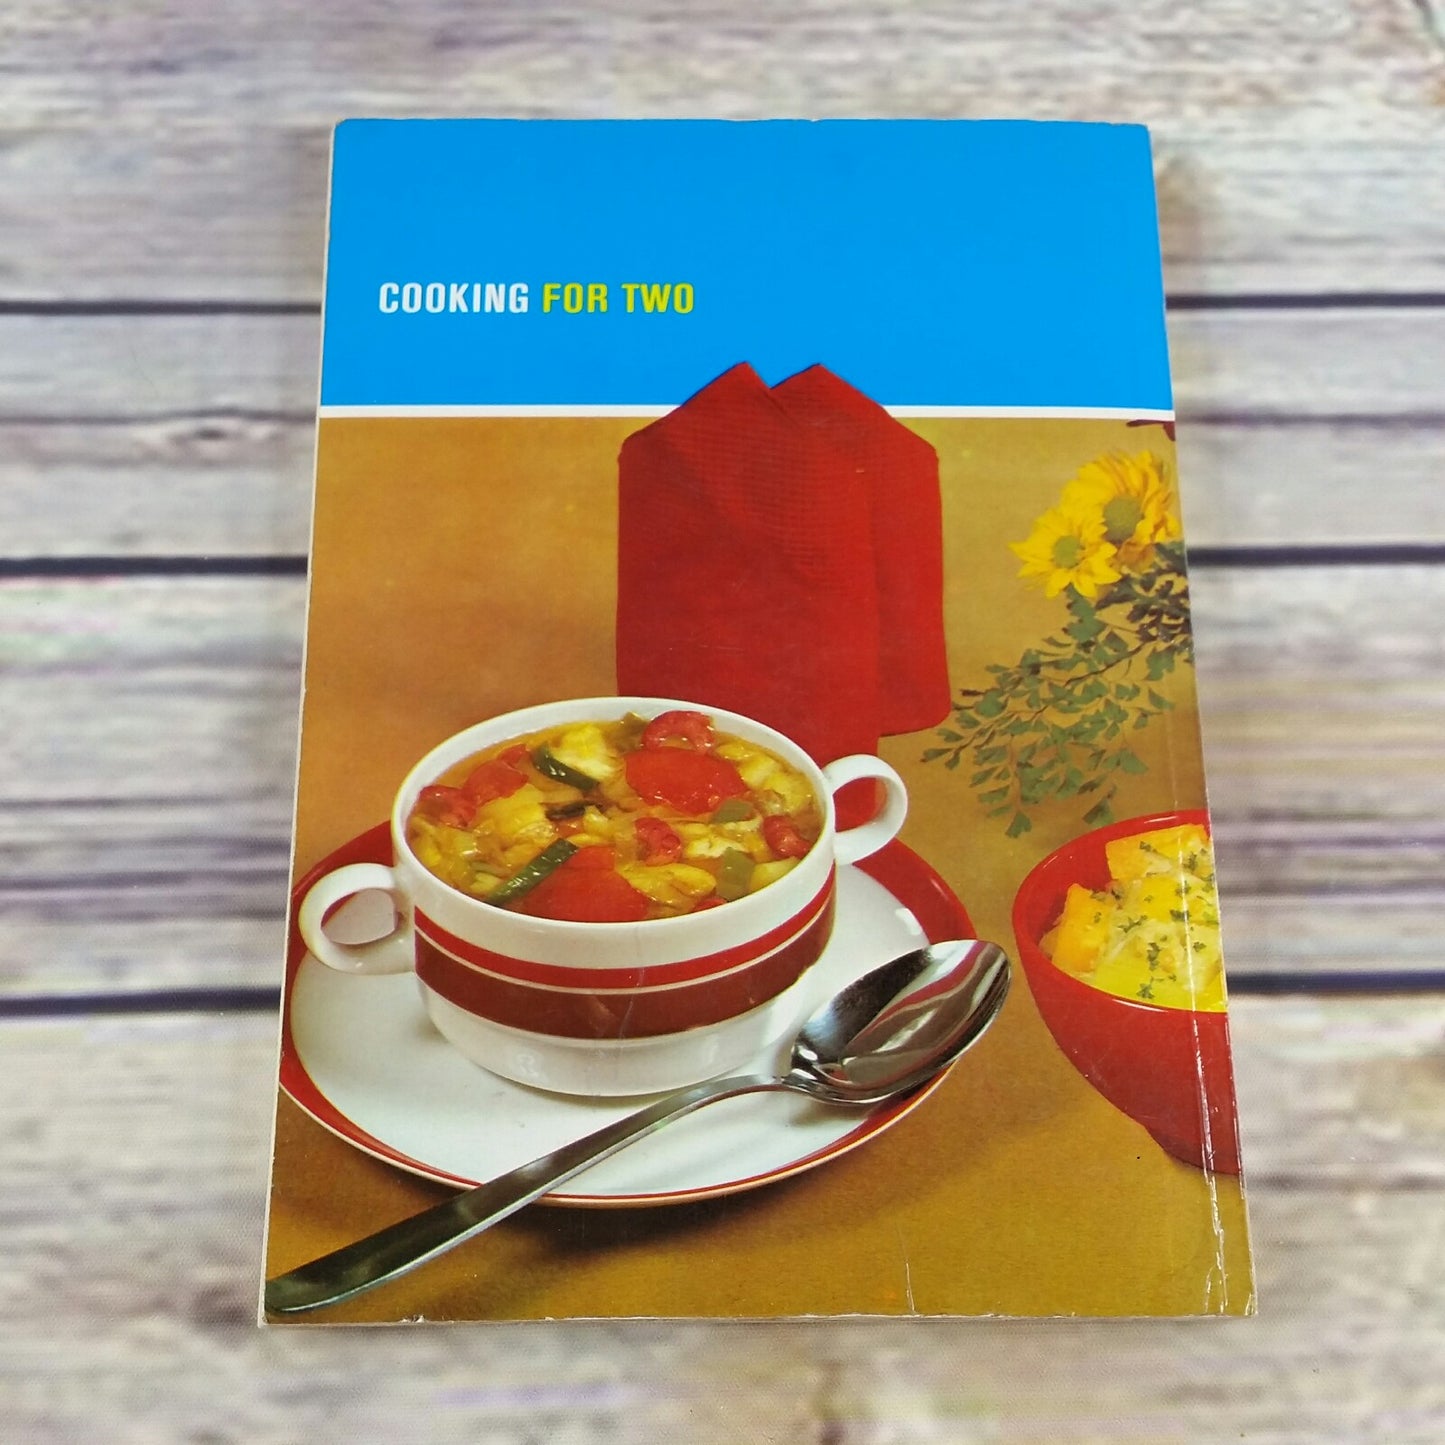 Vintage Cookbook Dr Oetker Cooking for Two 1972 Paperback Recipes English Language - At Grandma's Table